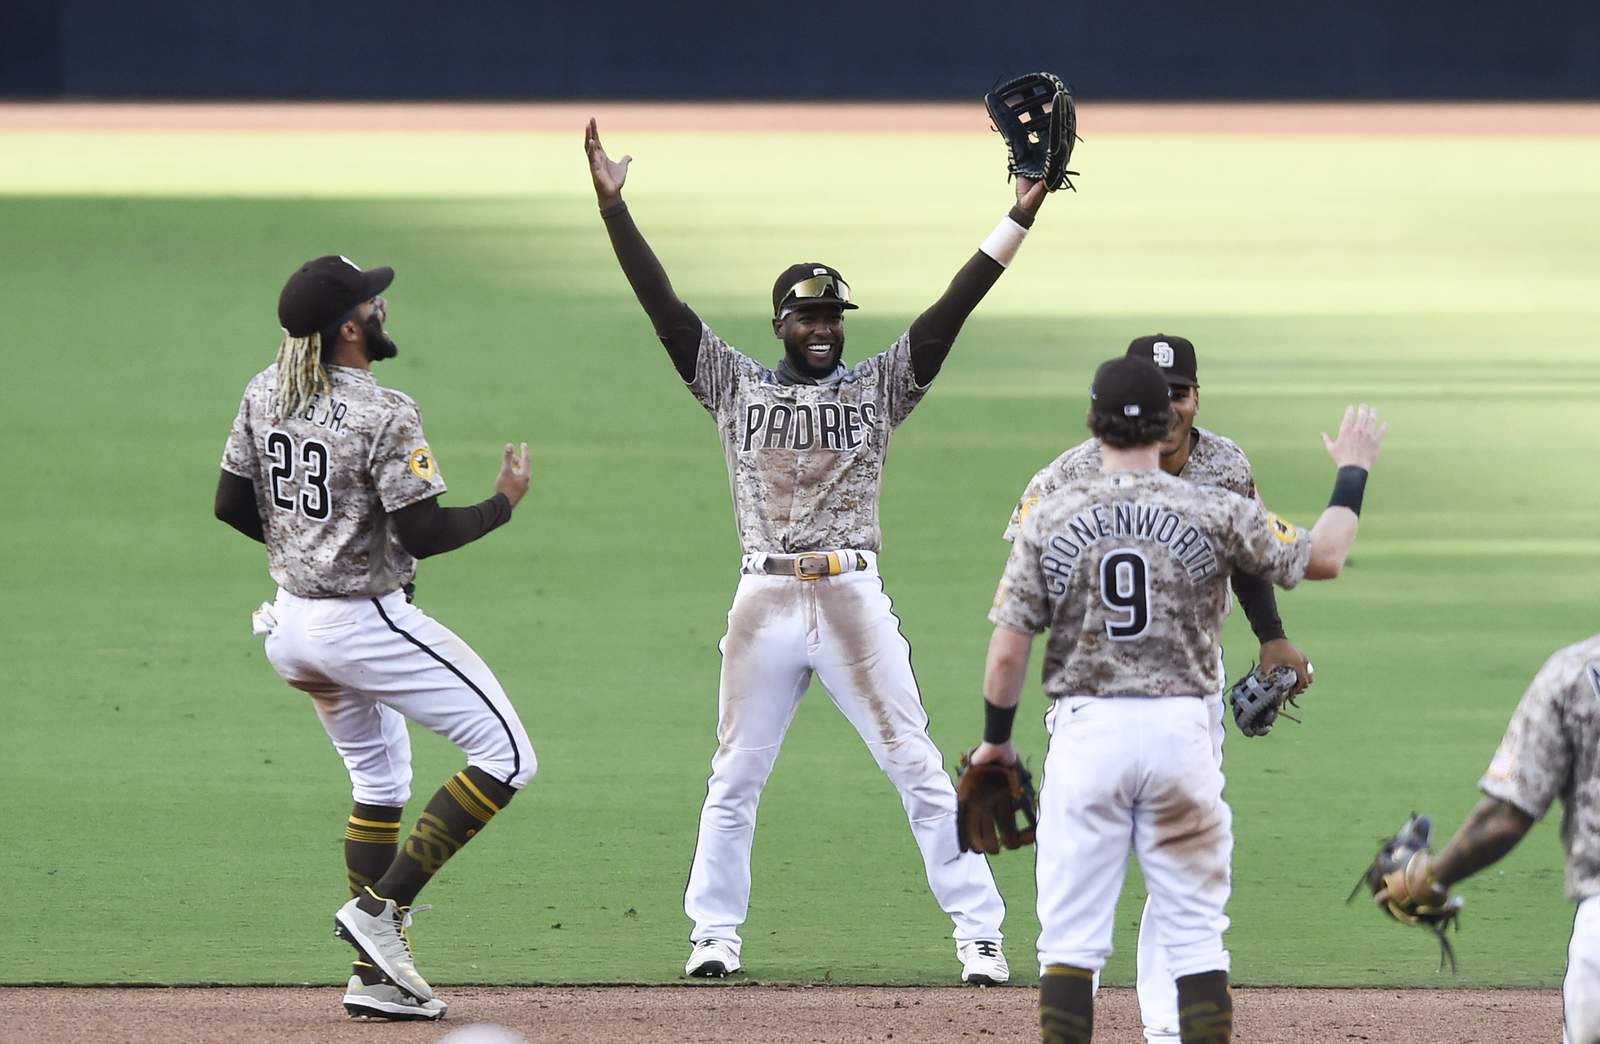 Rally puts Padres back in playoffs for 1st time in 14 years